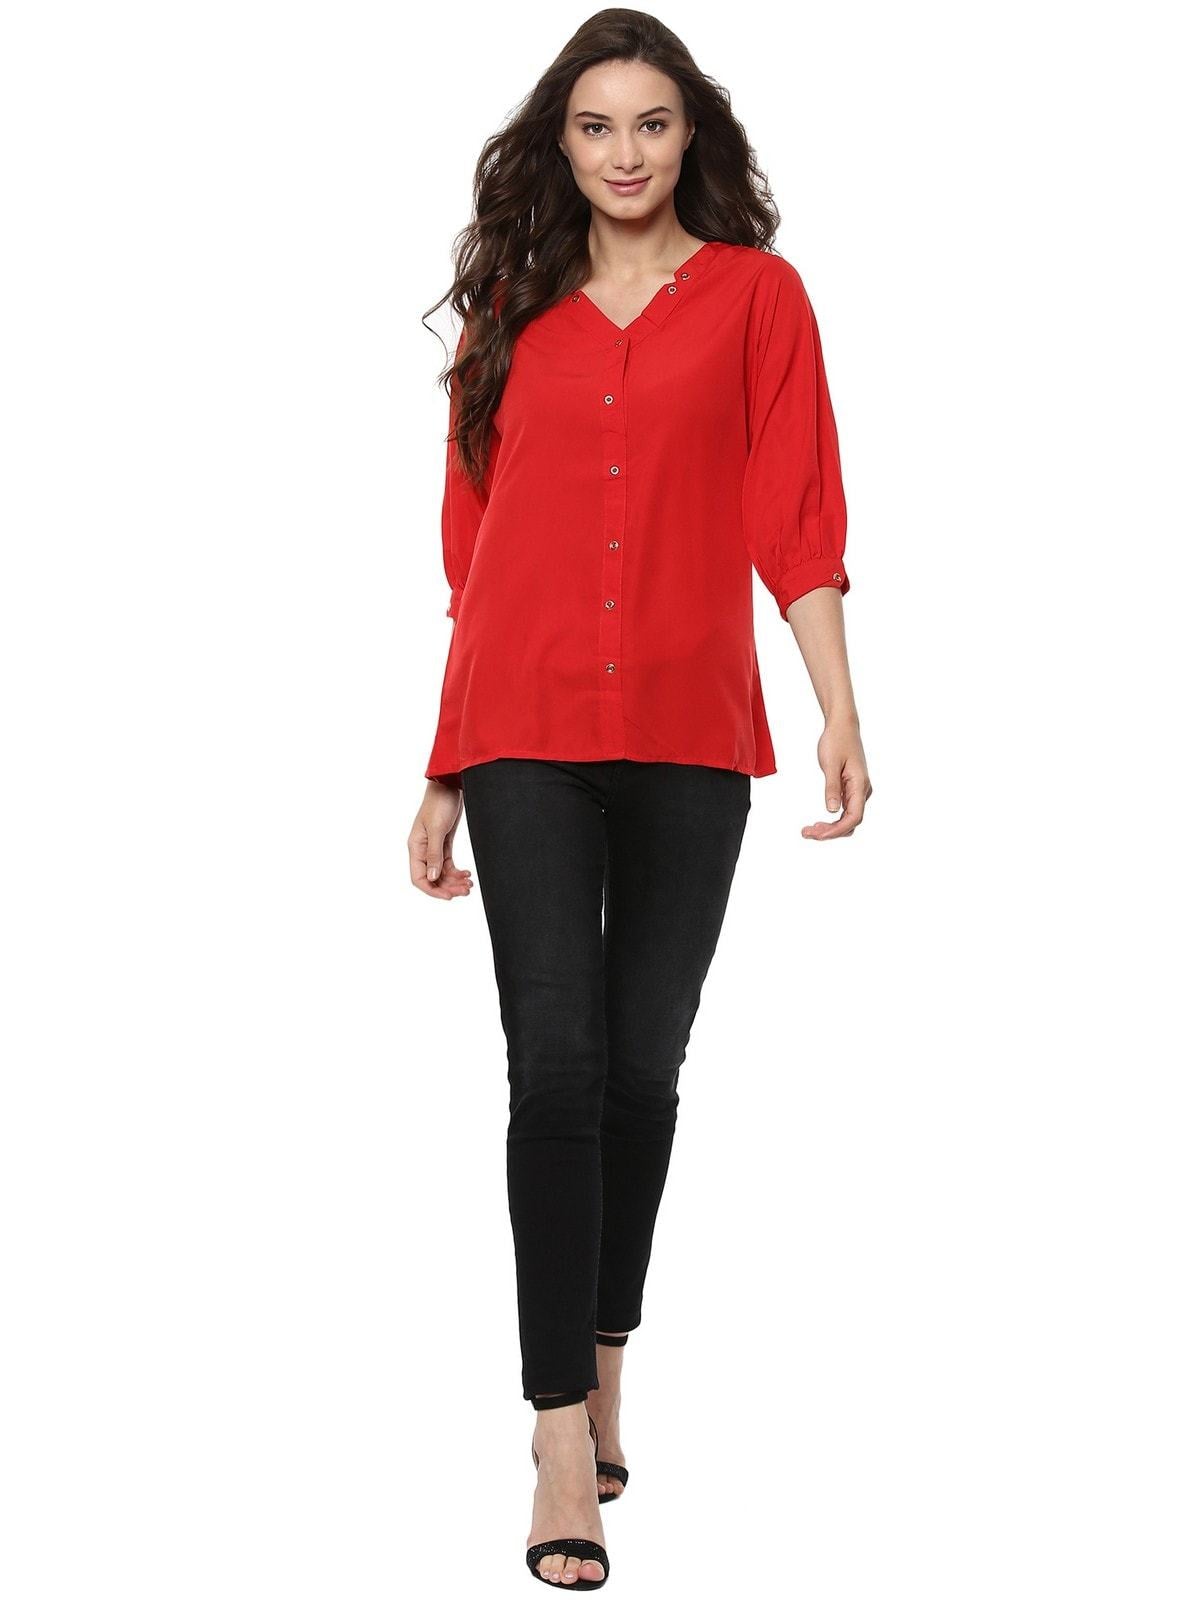 Women's Red Shirt Top With Detailed Notch Designs - Pannkh